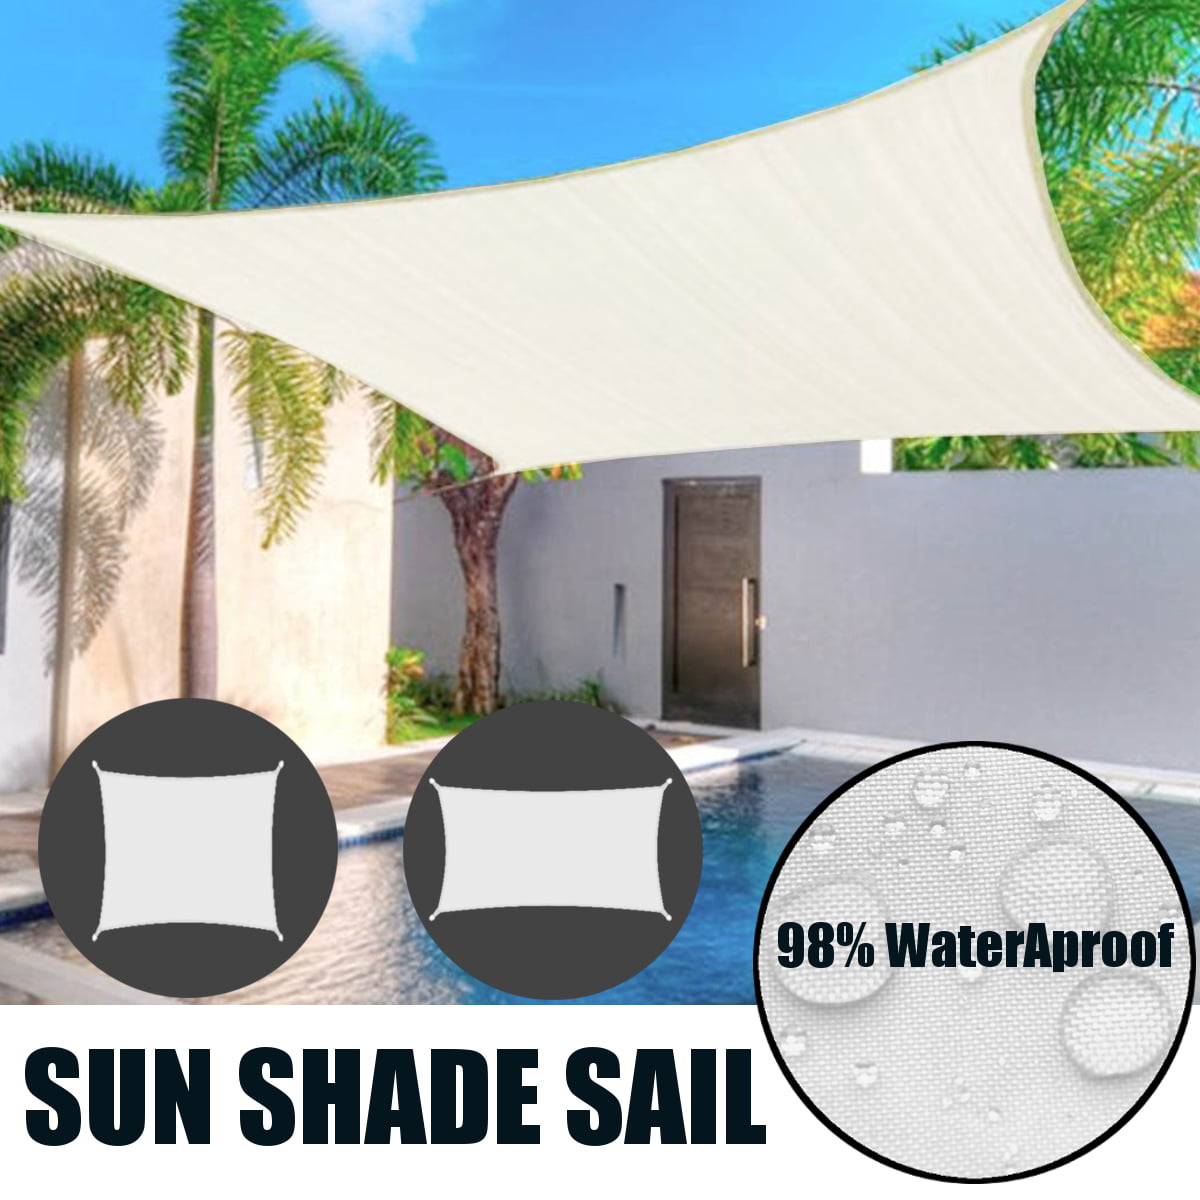 Details about   Waterproof Sun Shade Sail Outdoor Top Cover Canopy Patio Triangle Sail Tent S/M 